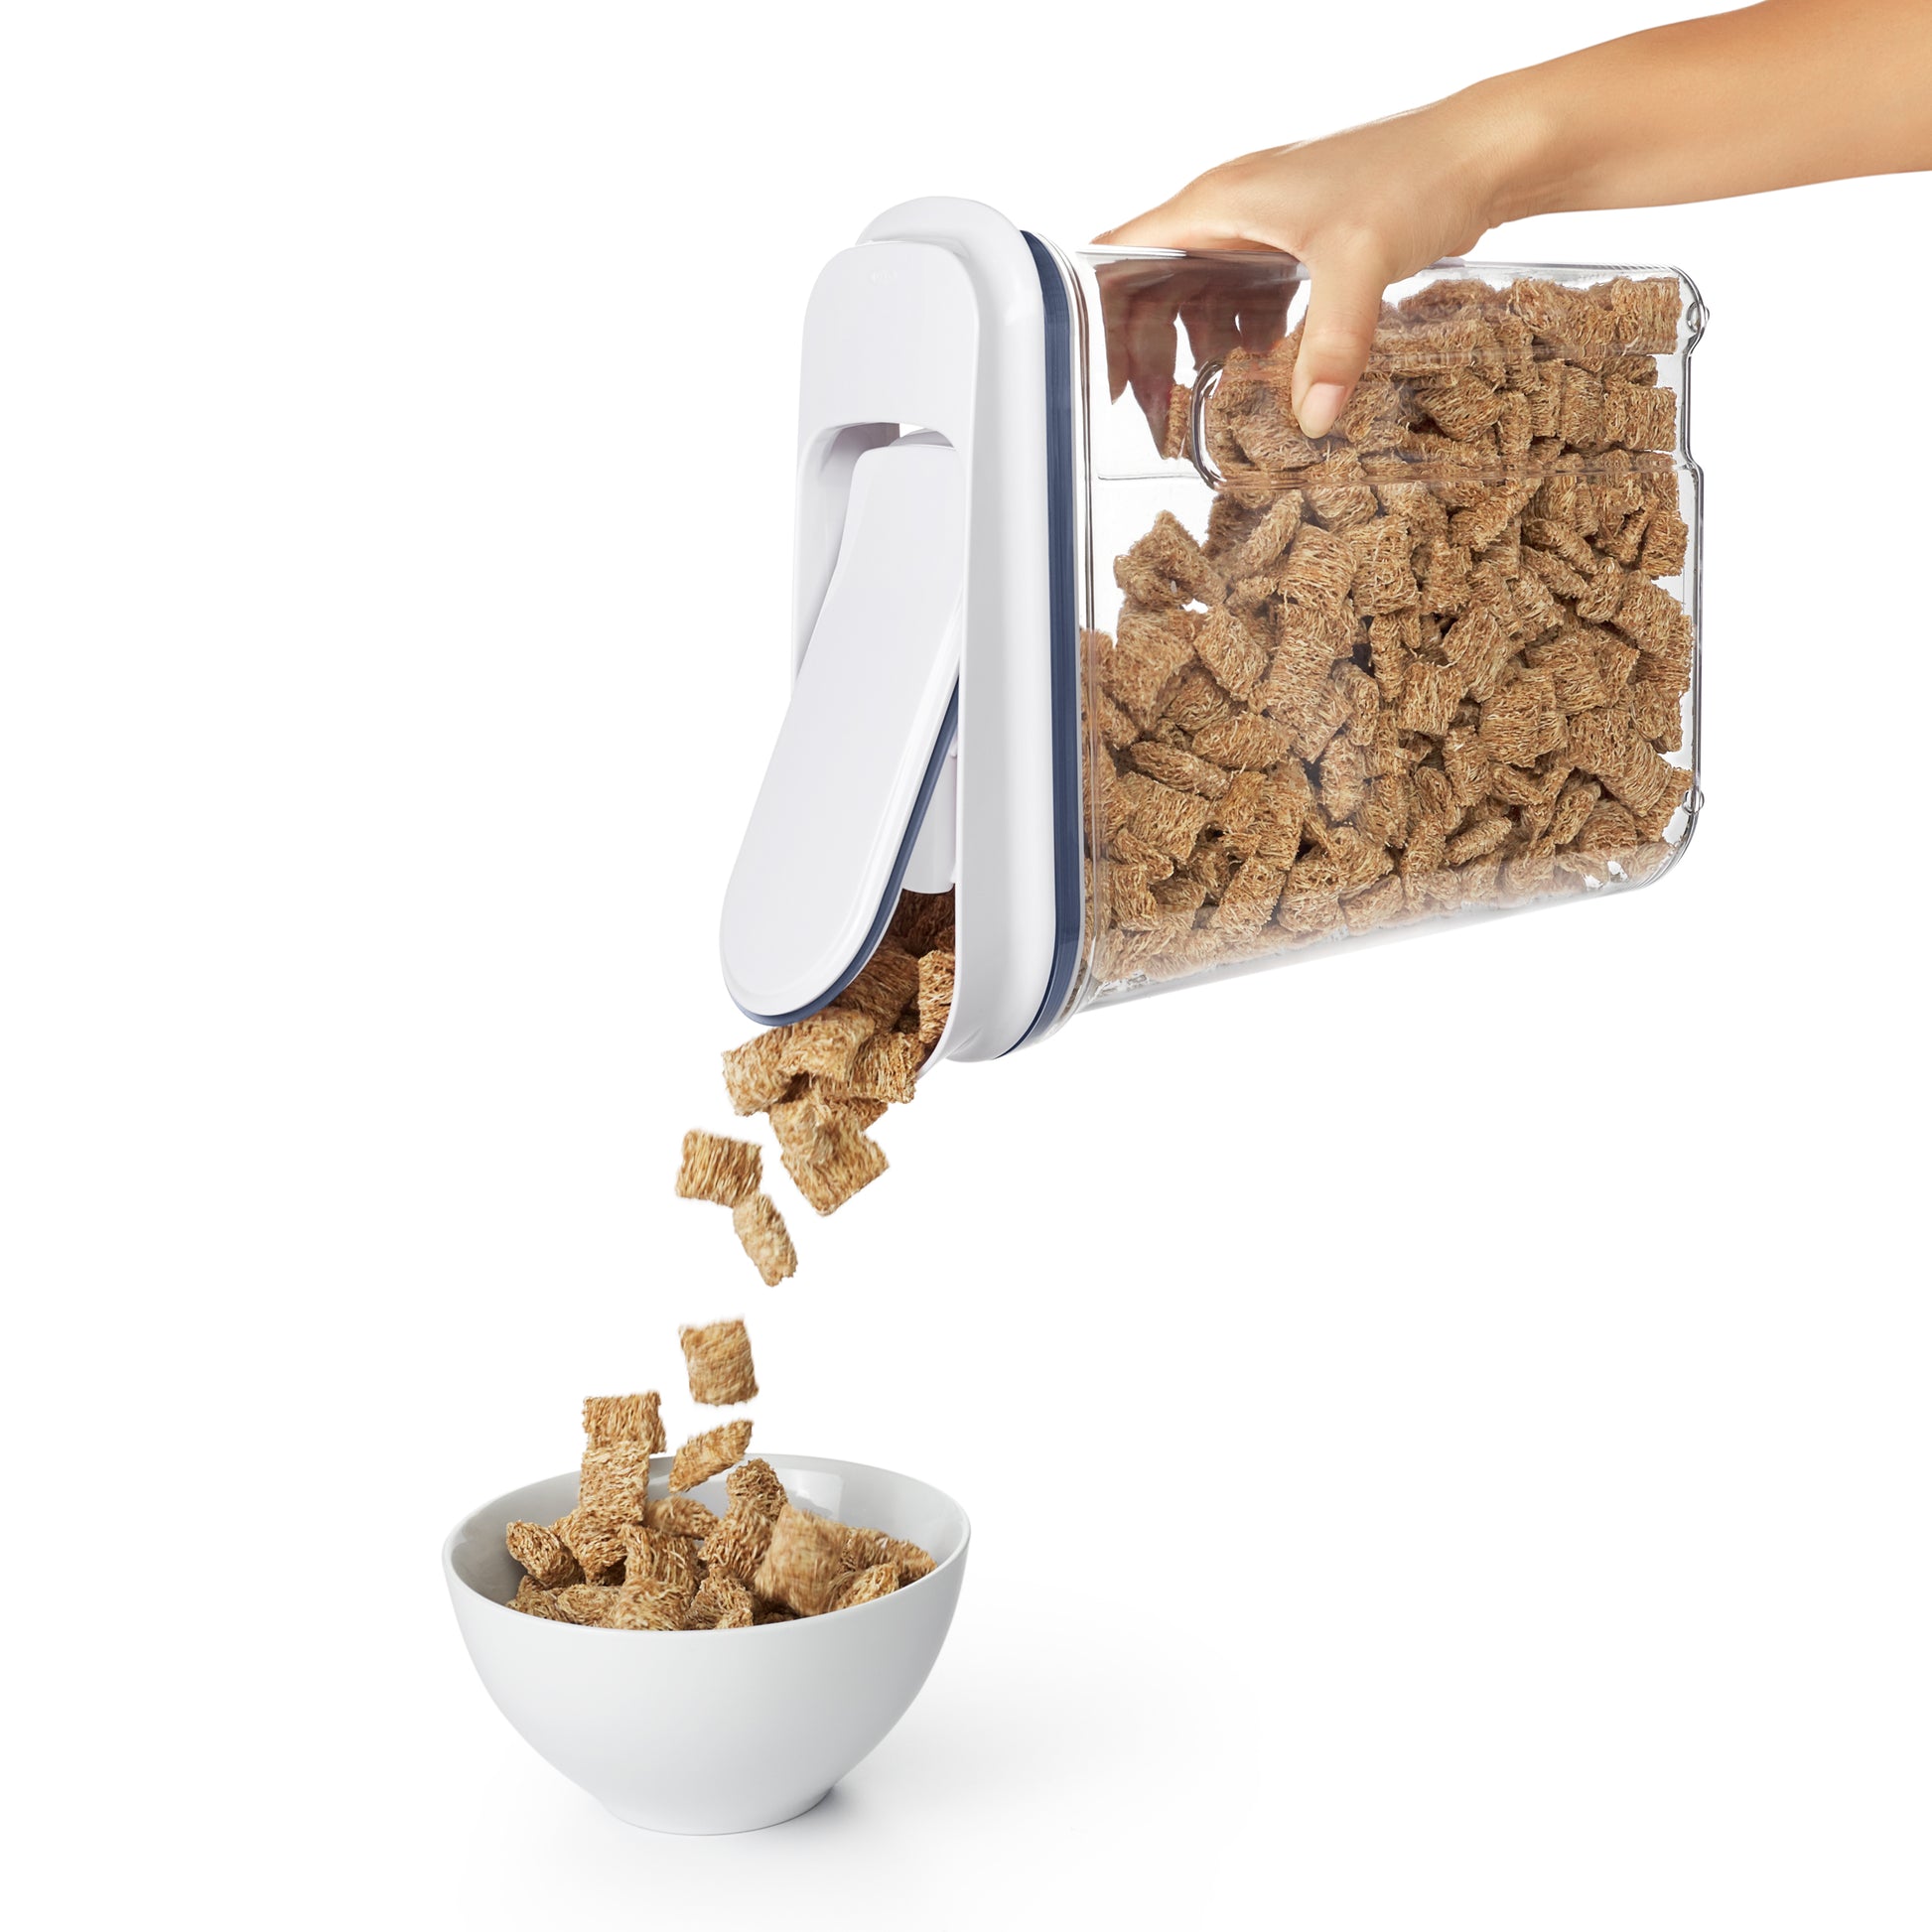 NEW OXO Good Grips Cereal Container 3.2L